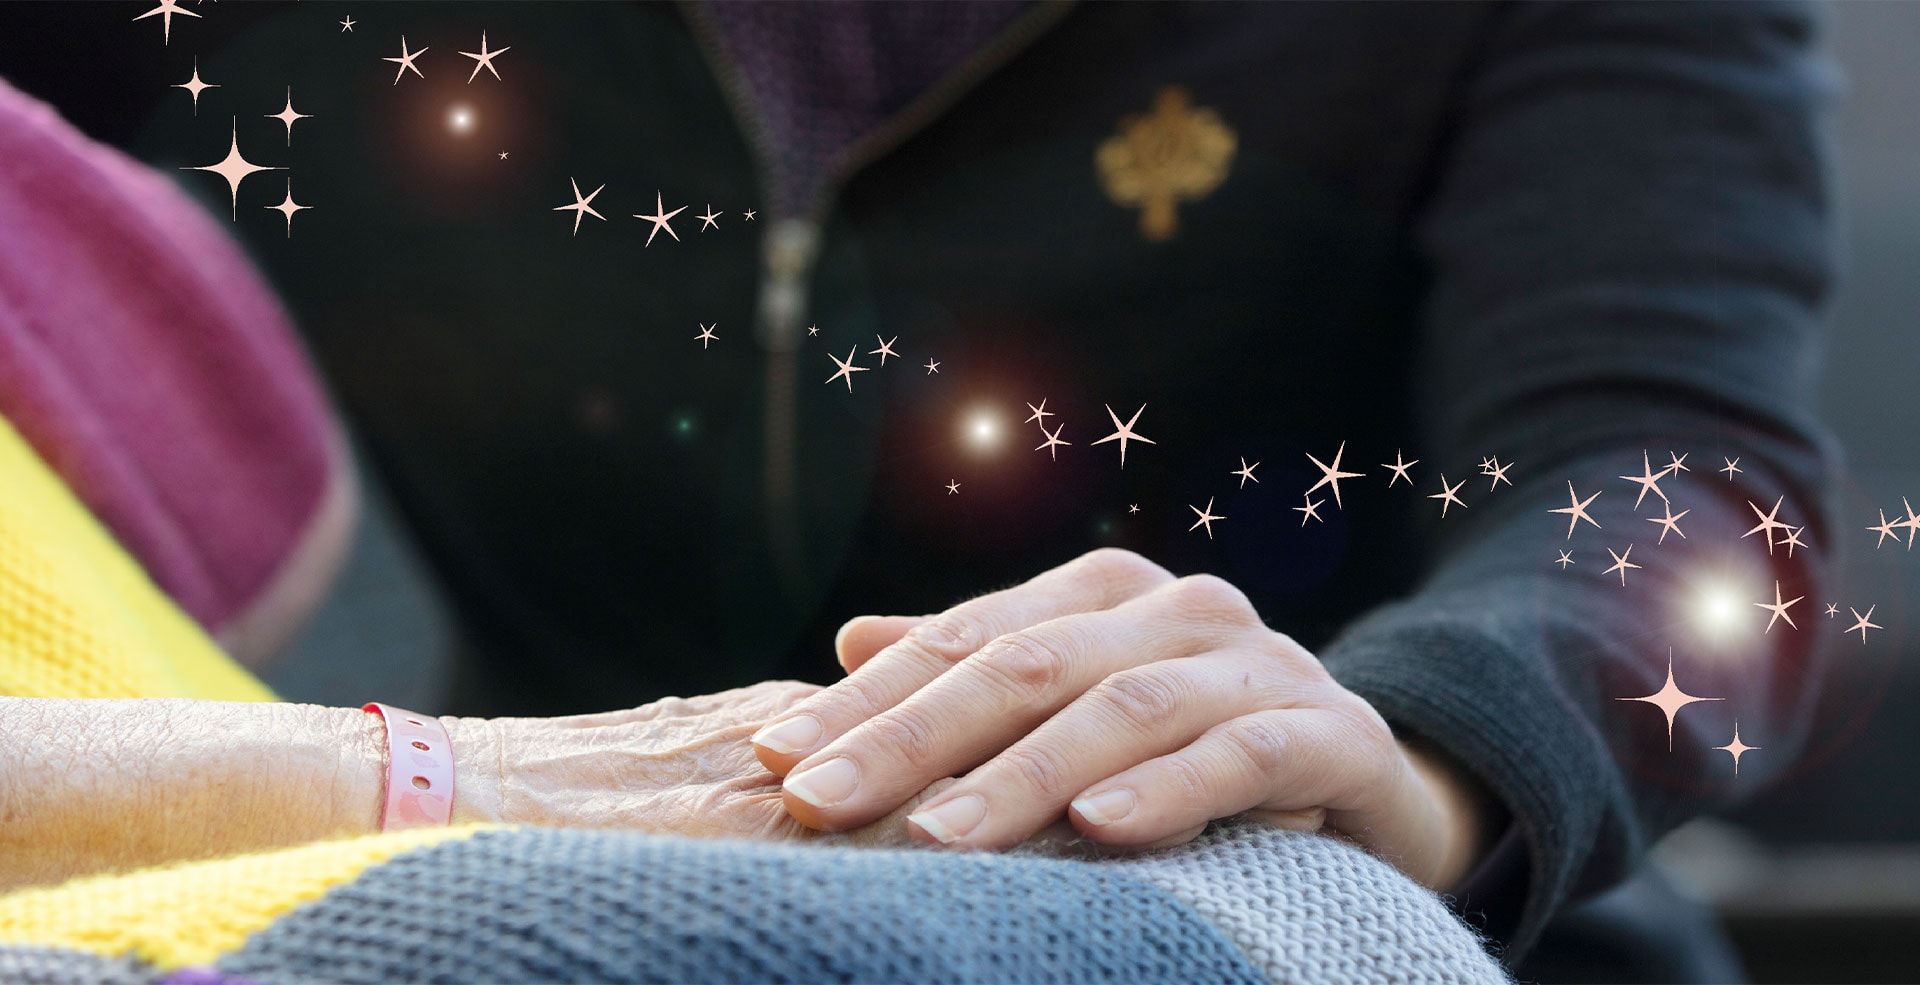 Caregiver hands embracing a patients hands with stars and lighting affect